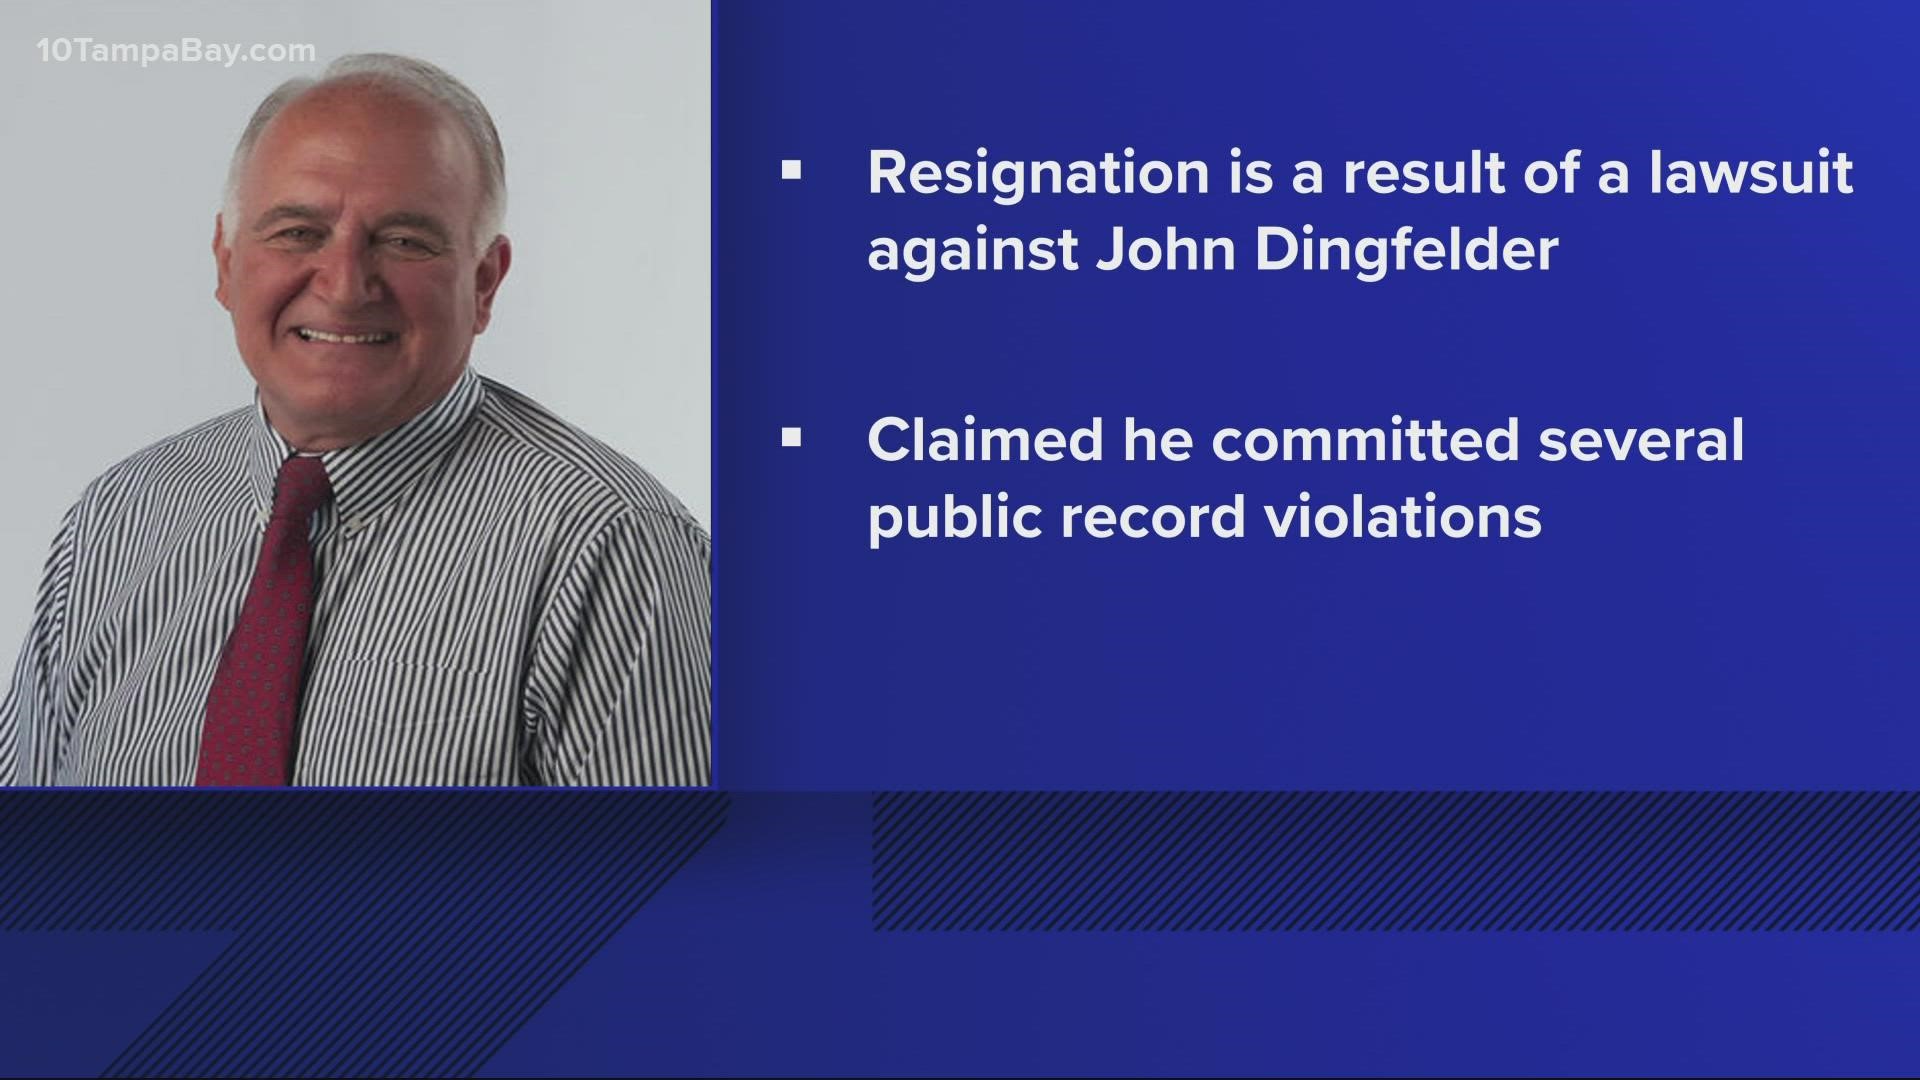 His resignation is part of a settlement agreement filed in Hillsborough County Circuit Court stemming from allegations he violated public records laws.